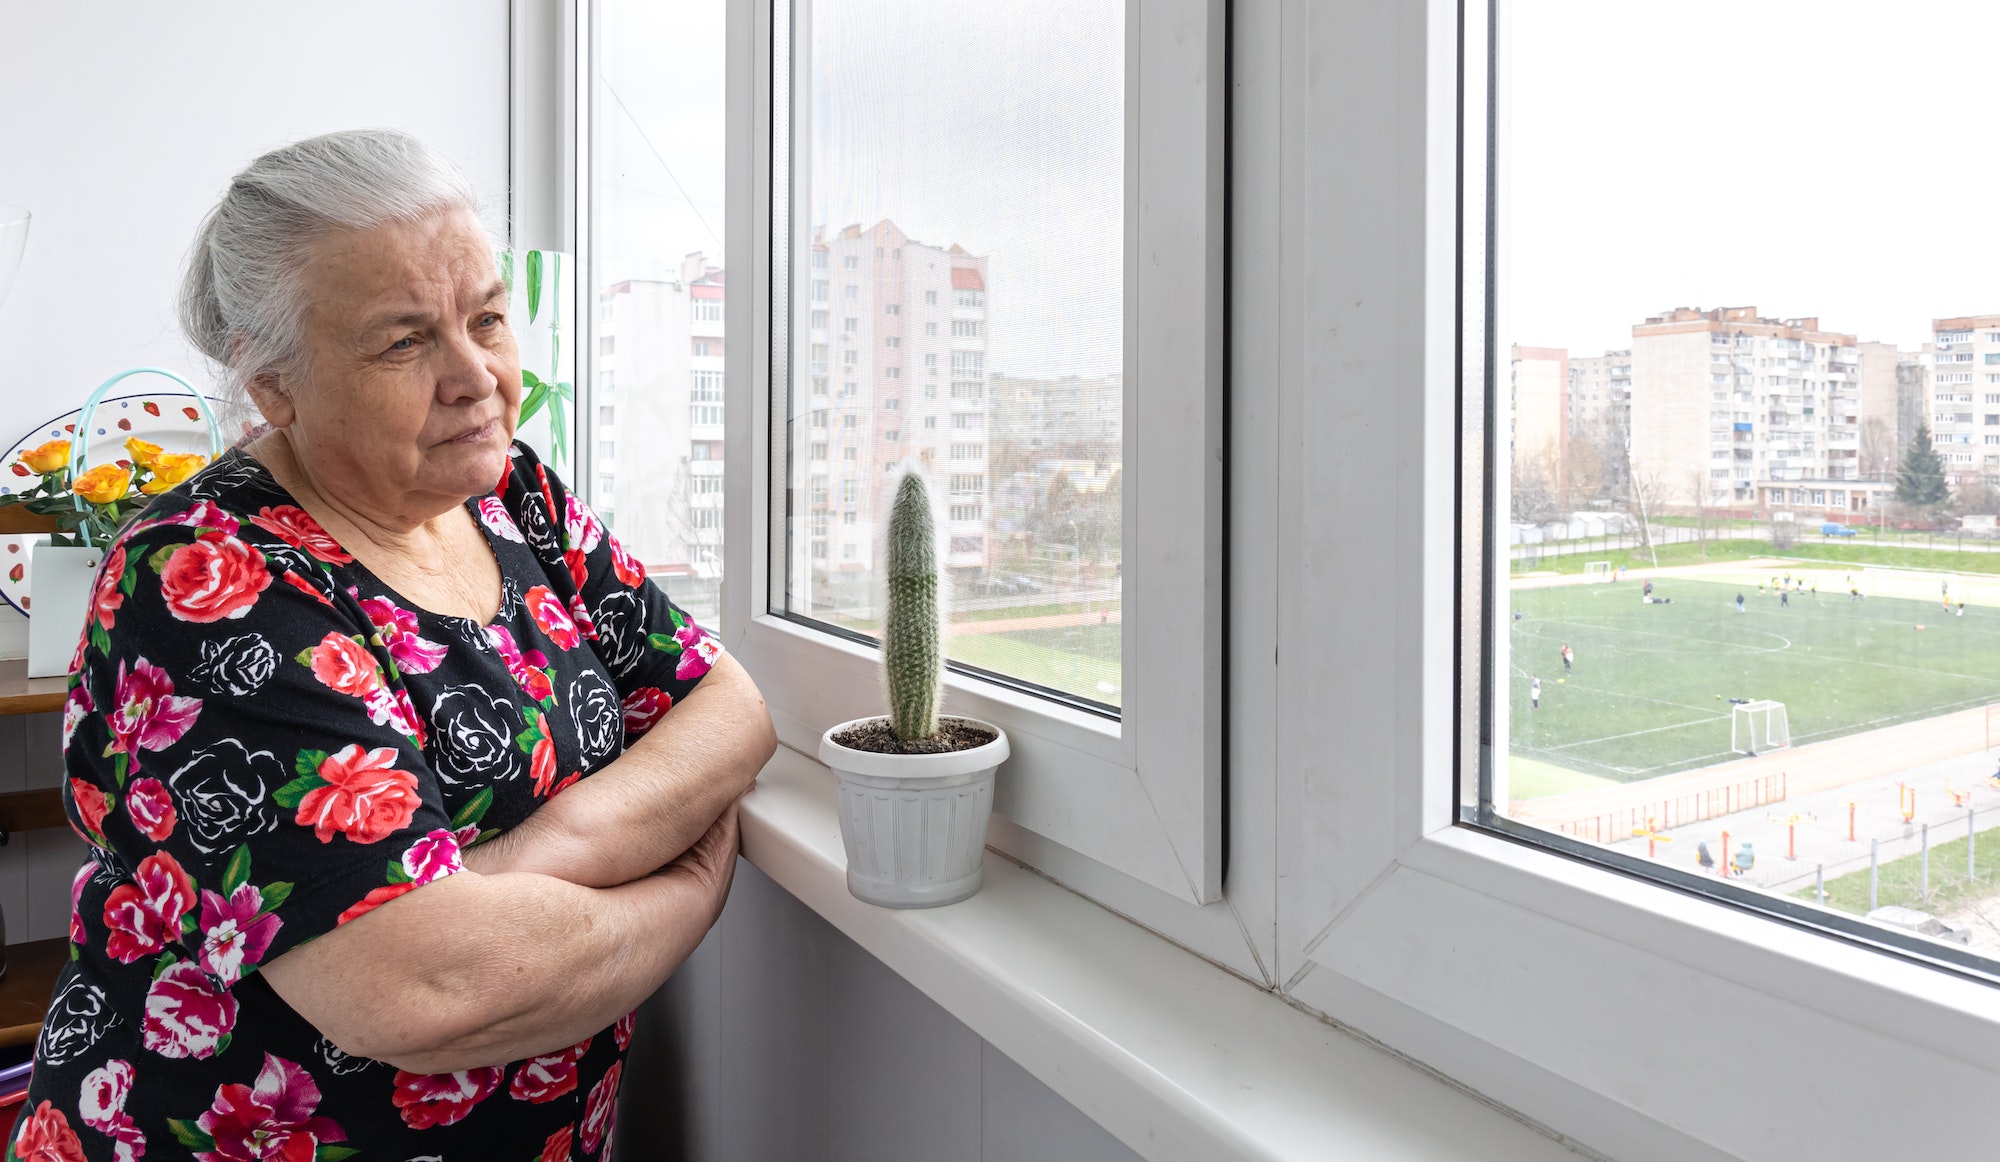 A sad elderly woman looks out the window.